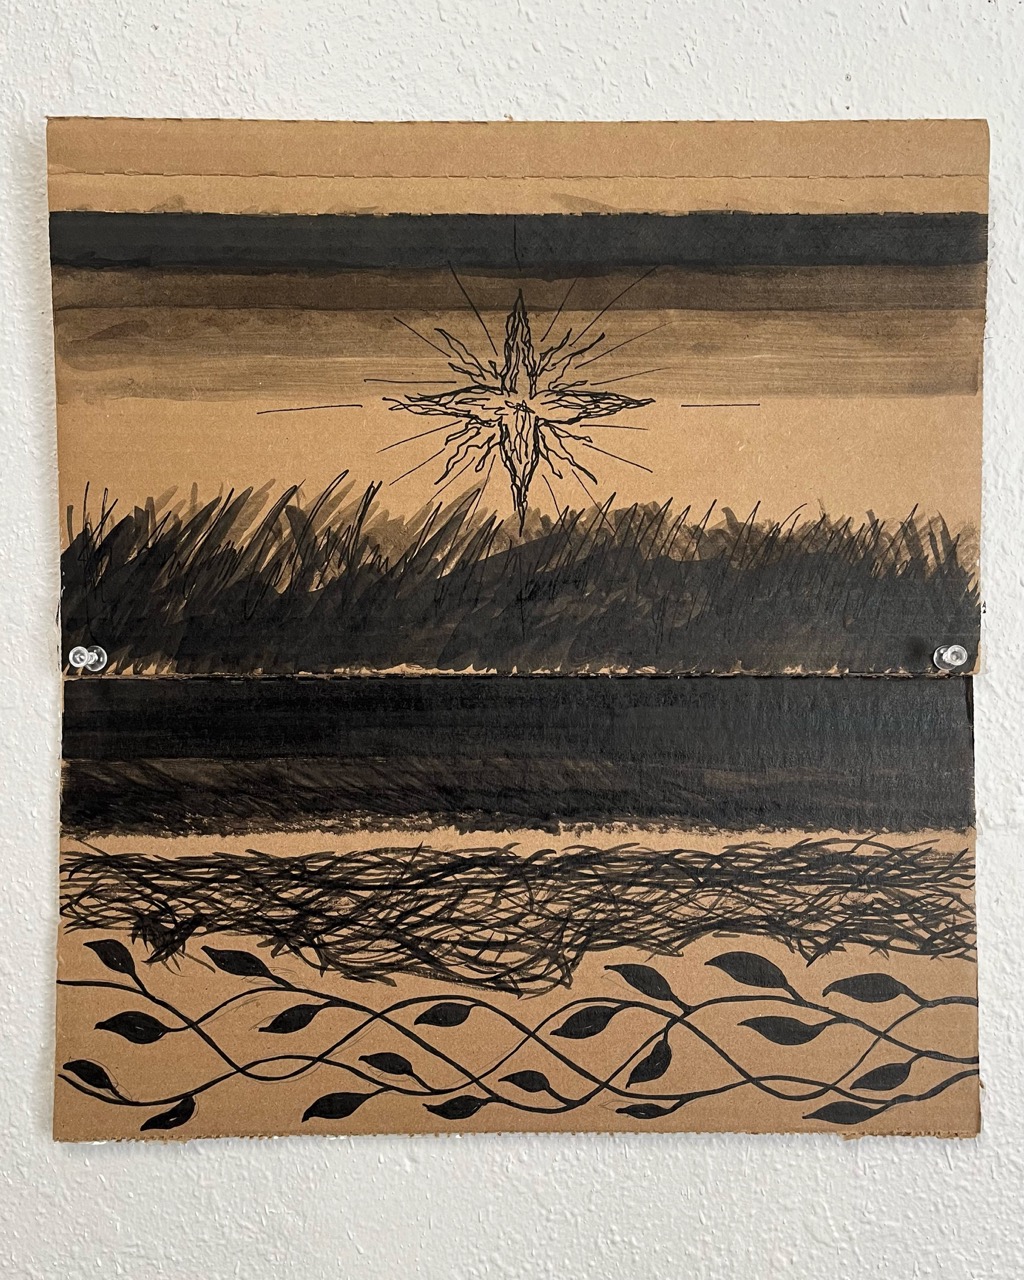 An ink drawing on corrugated cardboard.